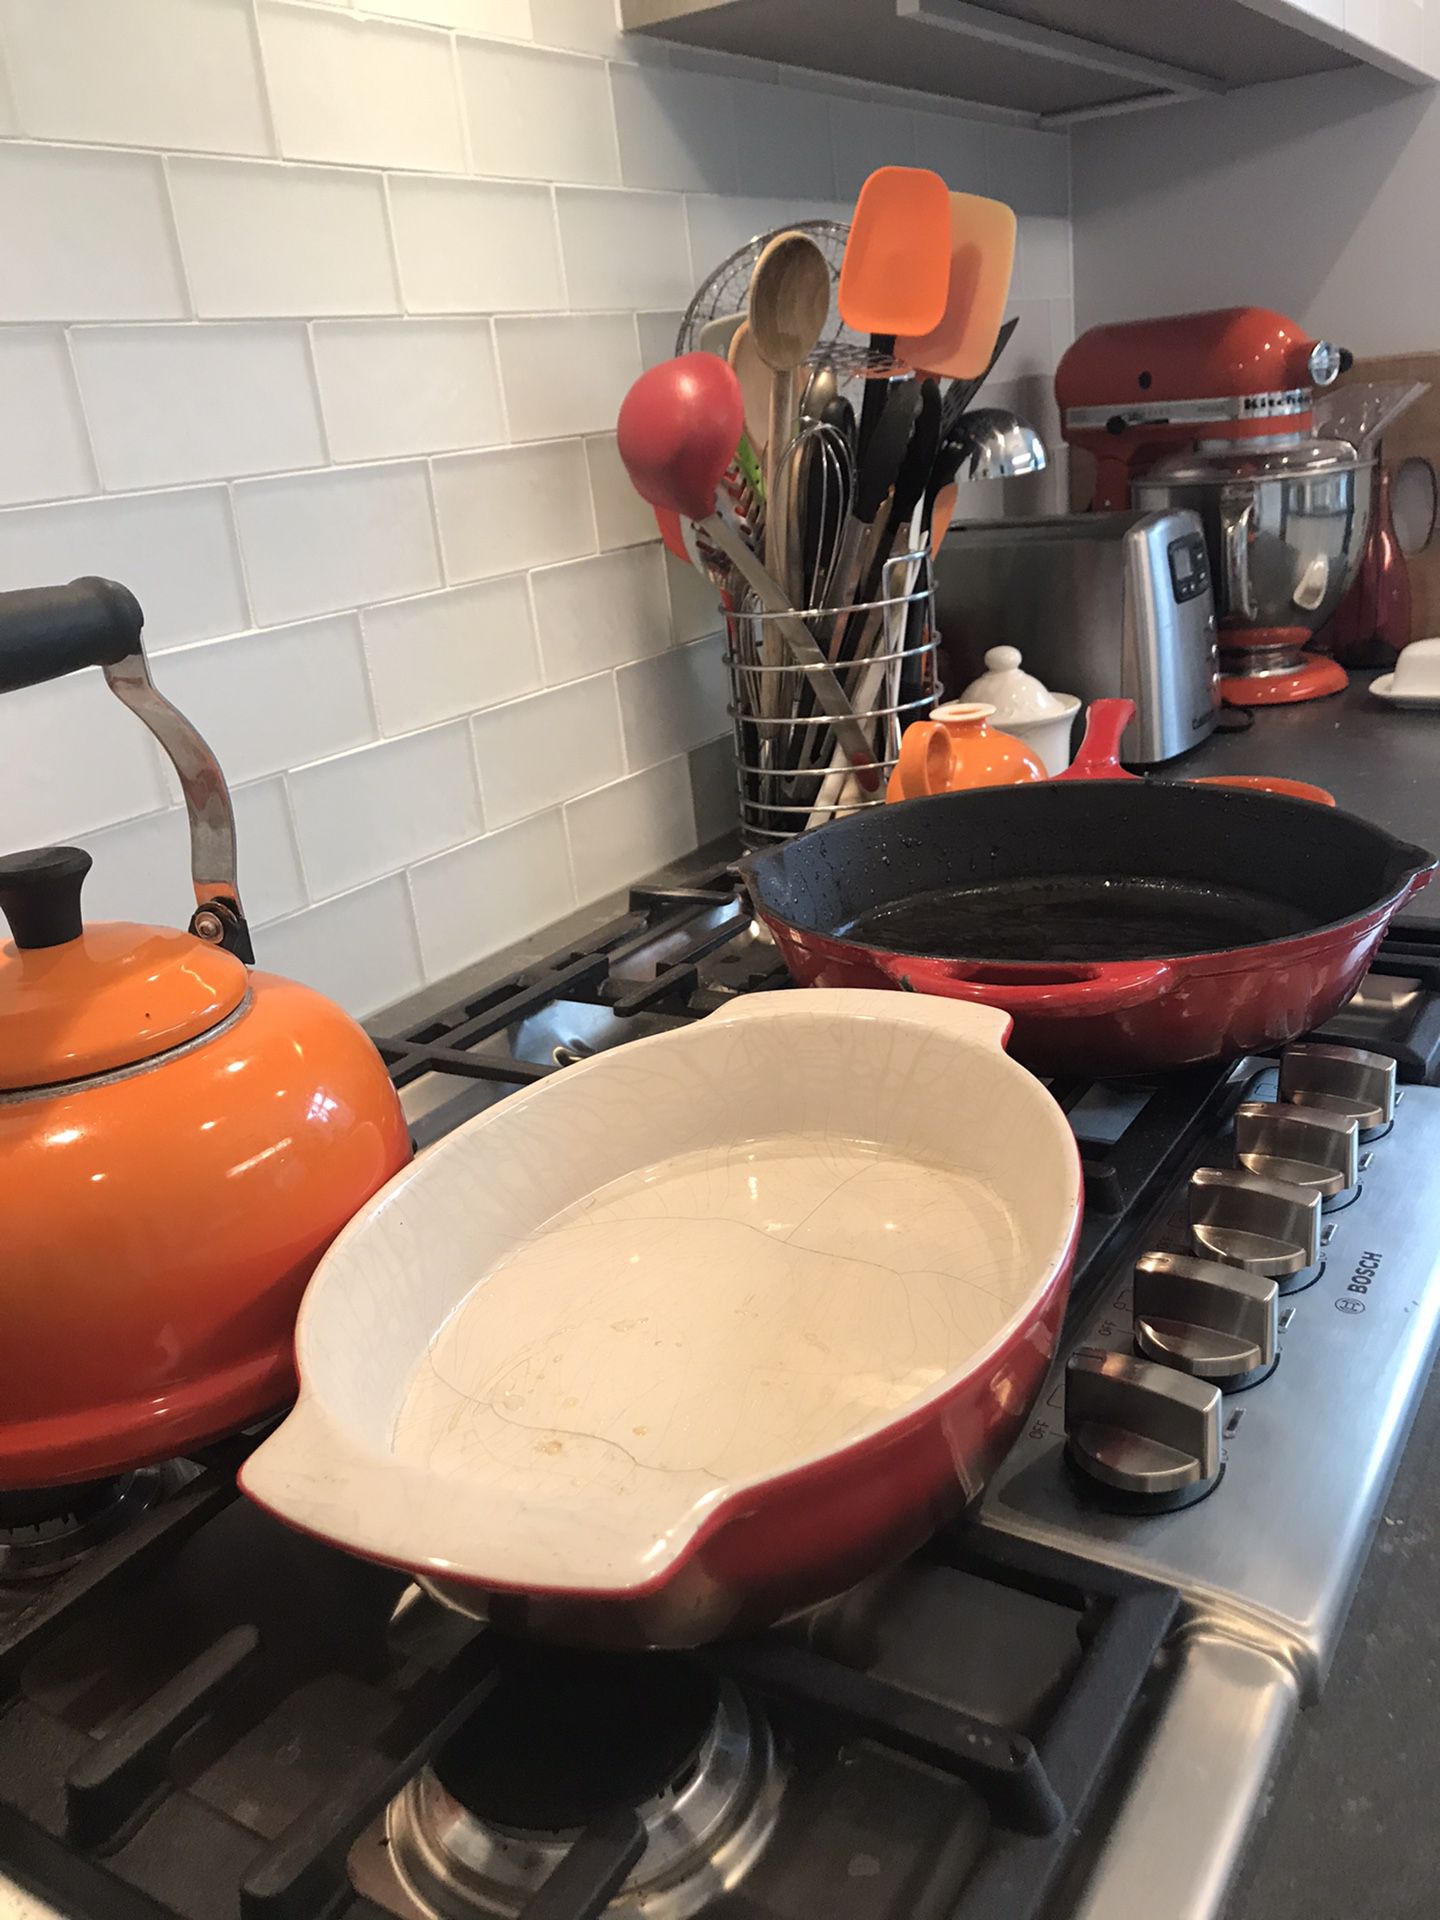 Red Pyrex Bakewear and Cast Iron Cookware